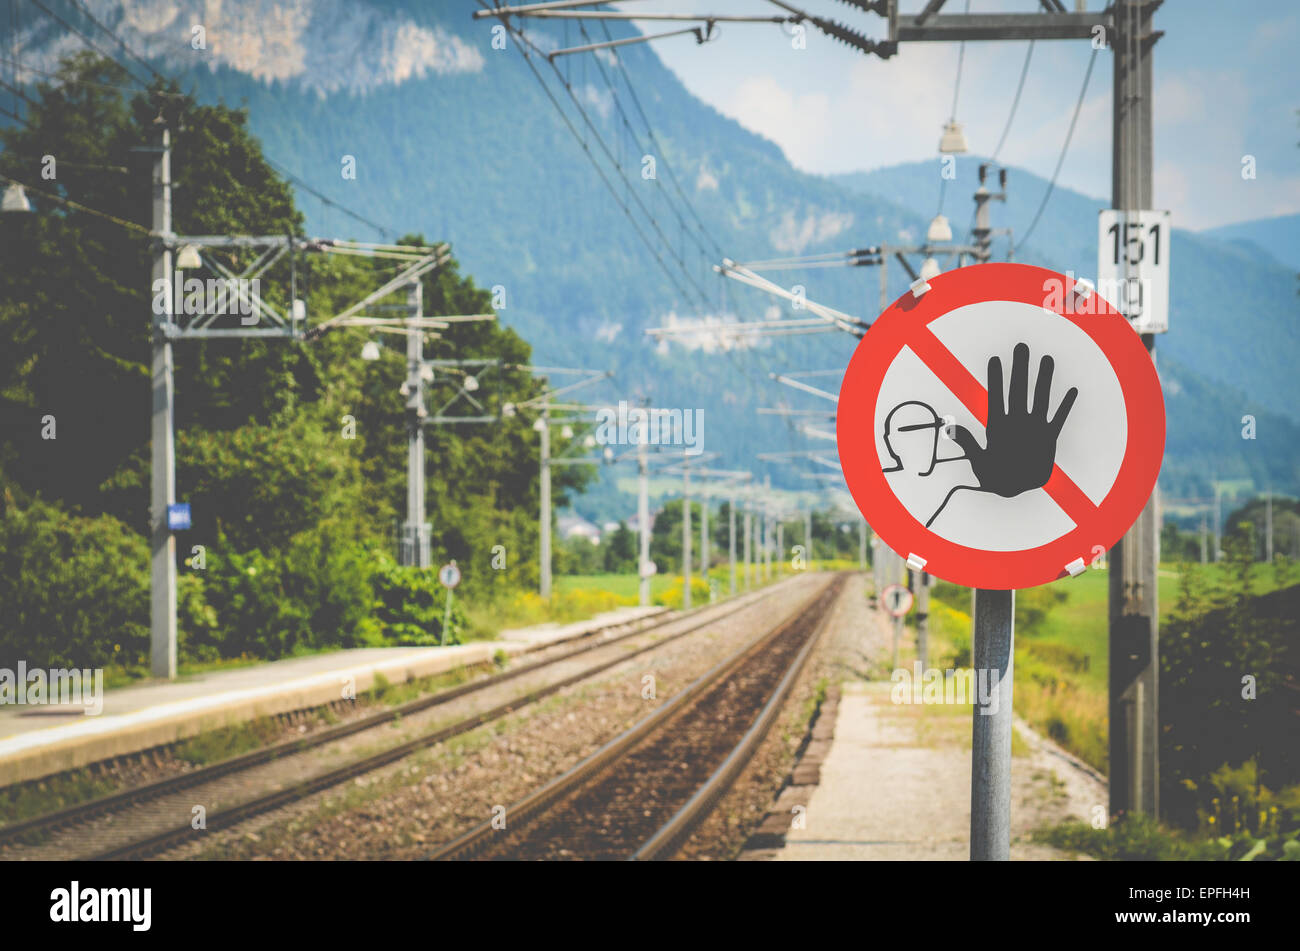 A Warning Sign At A Train Station In The Alps In Austria Stock Photo